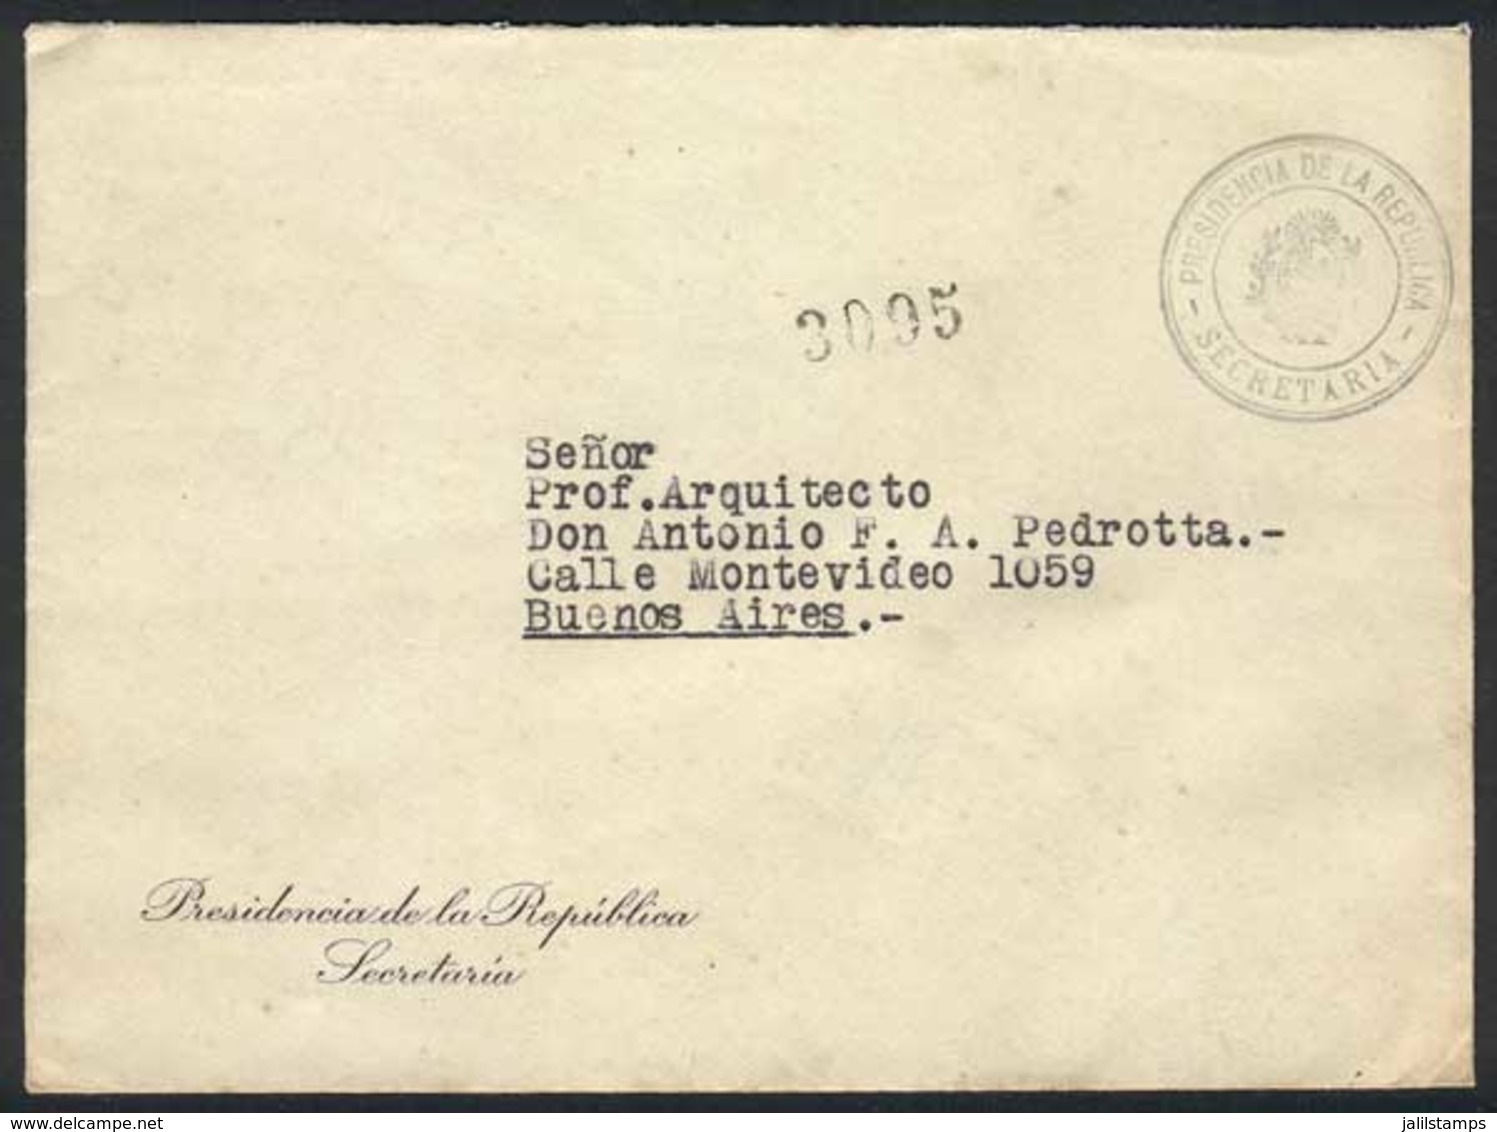 URUGUAY: Cover Of The Secretariat Of The Presidency, Sent Stampless To Argentina On 17/MAR/1943, Nice Postal Markings, V - Uruguay